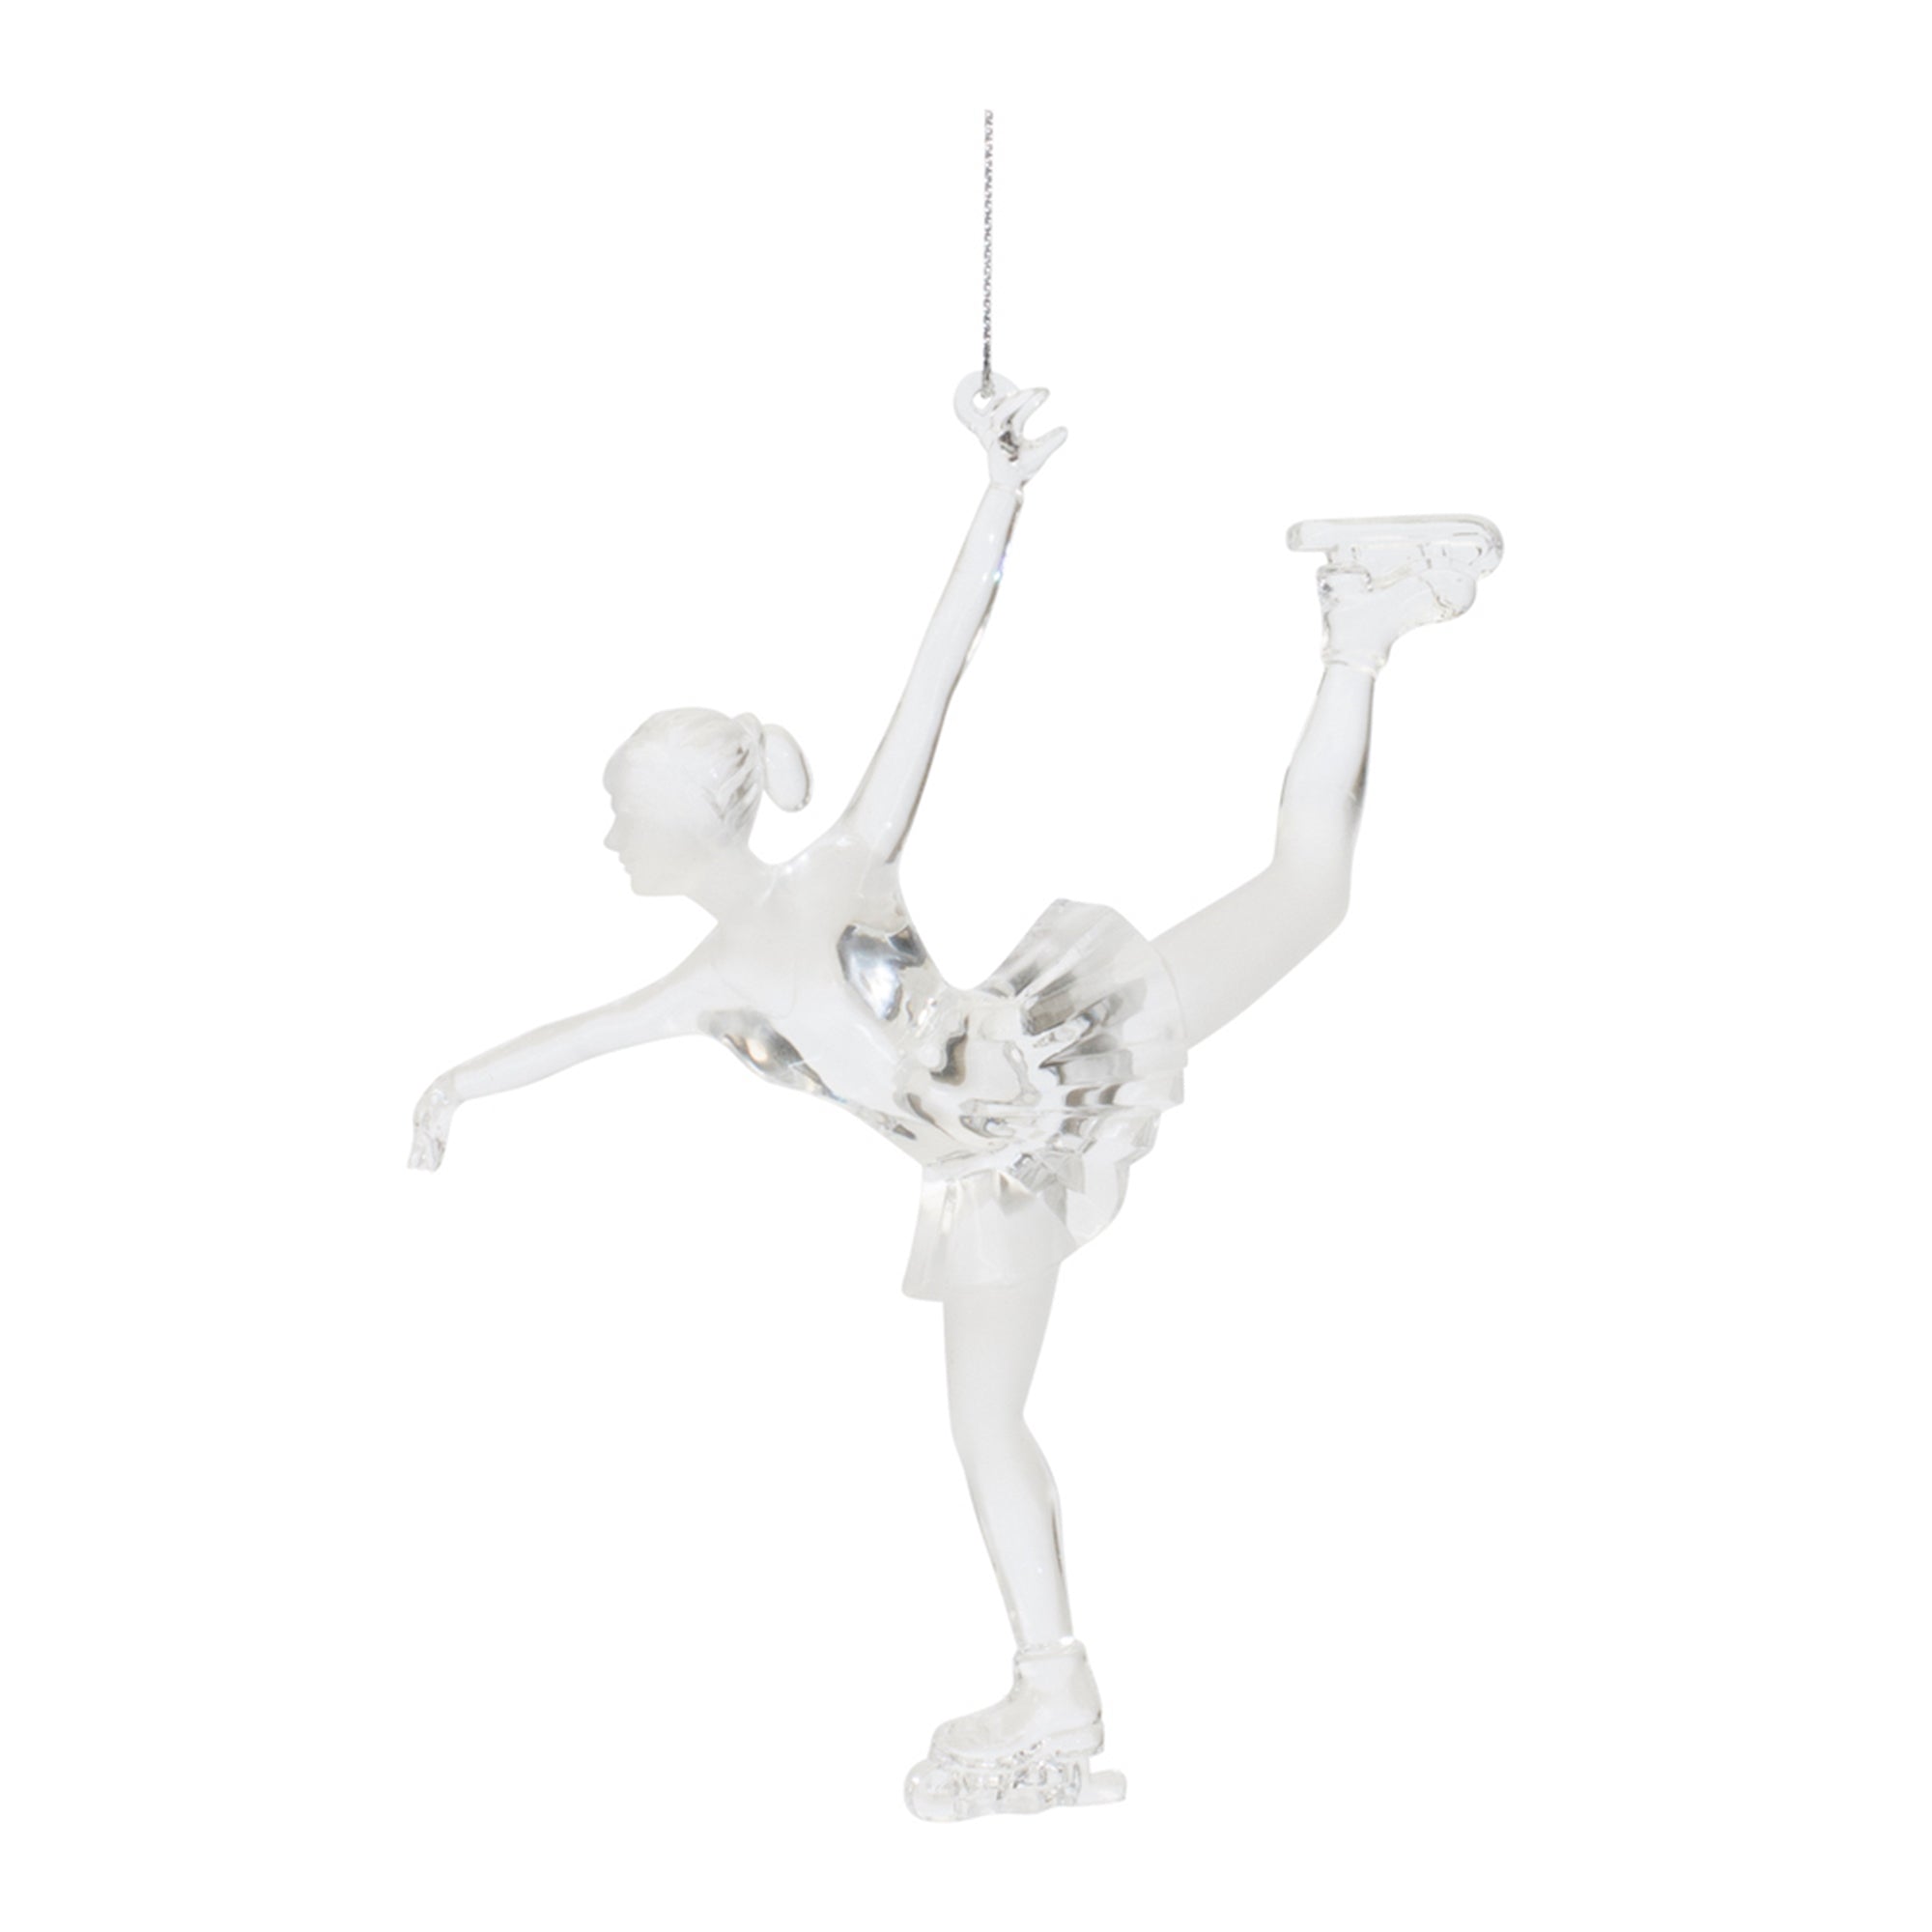 Clear Acrylic Ice Skater Ornament (Set of 4)